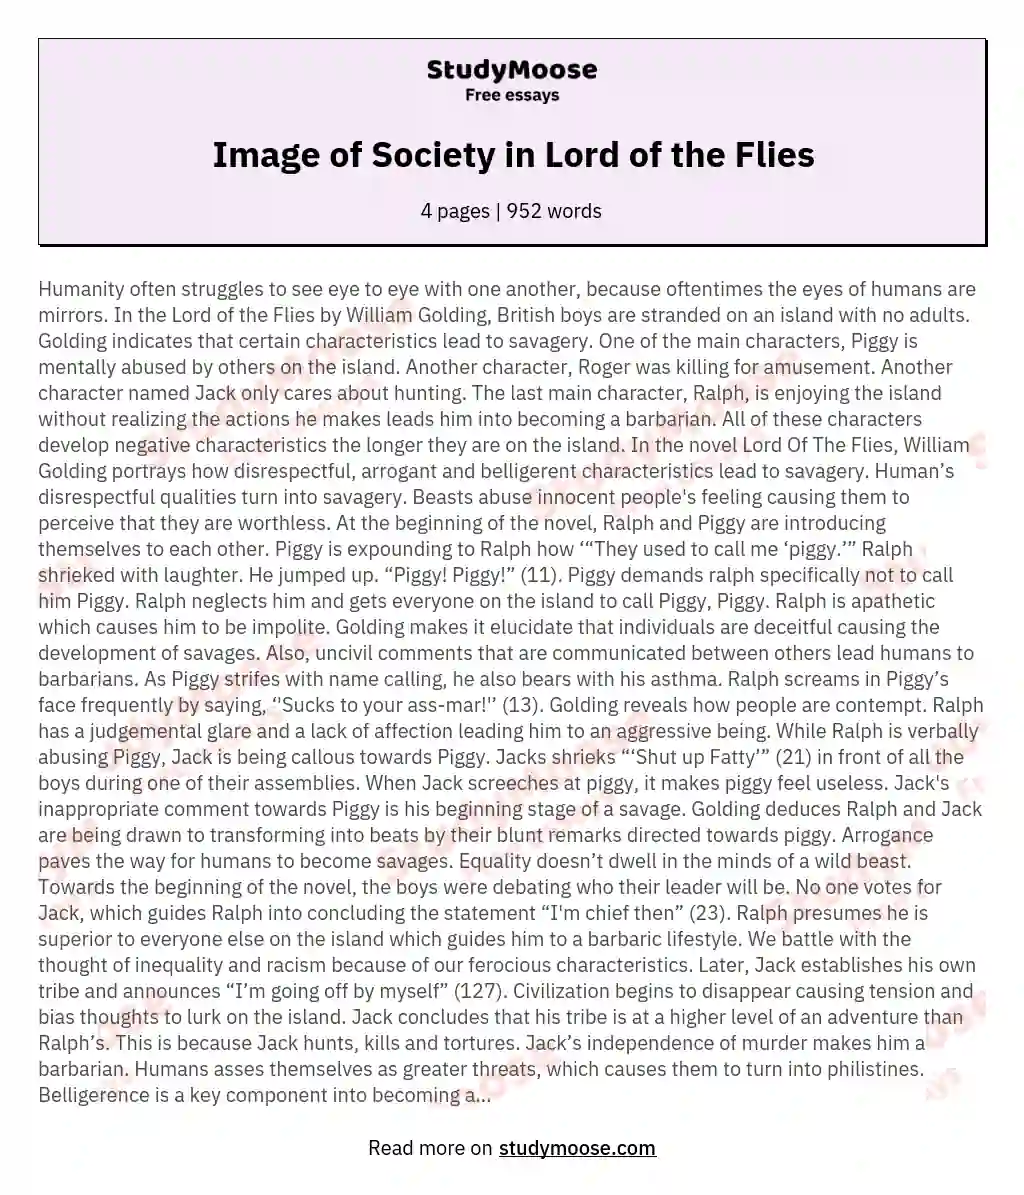 Image of Society in Lord of the Flies